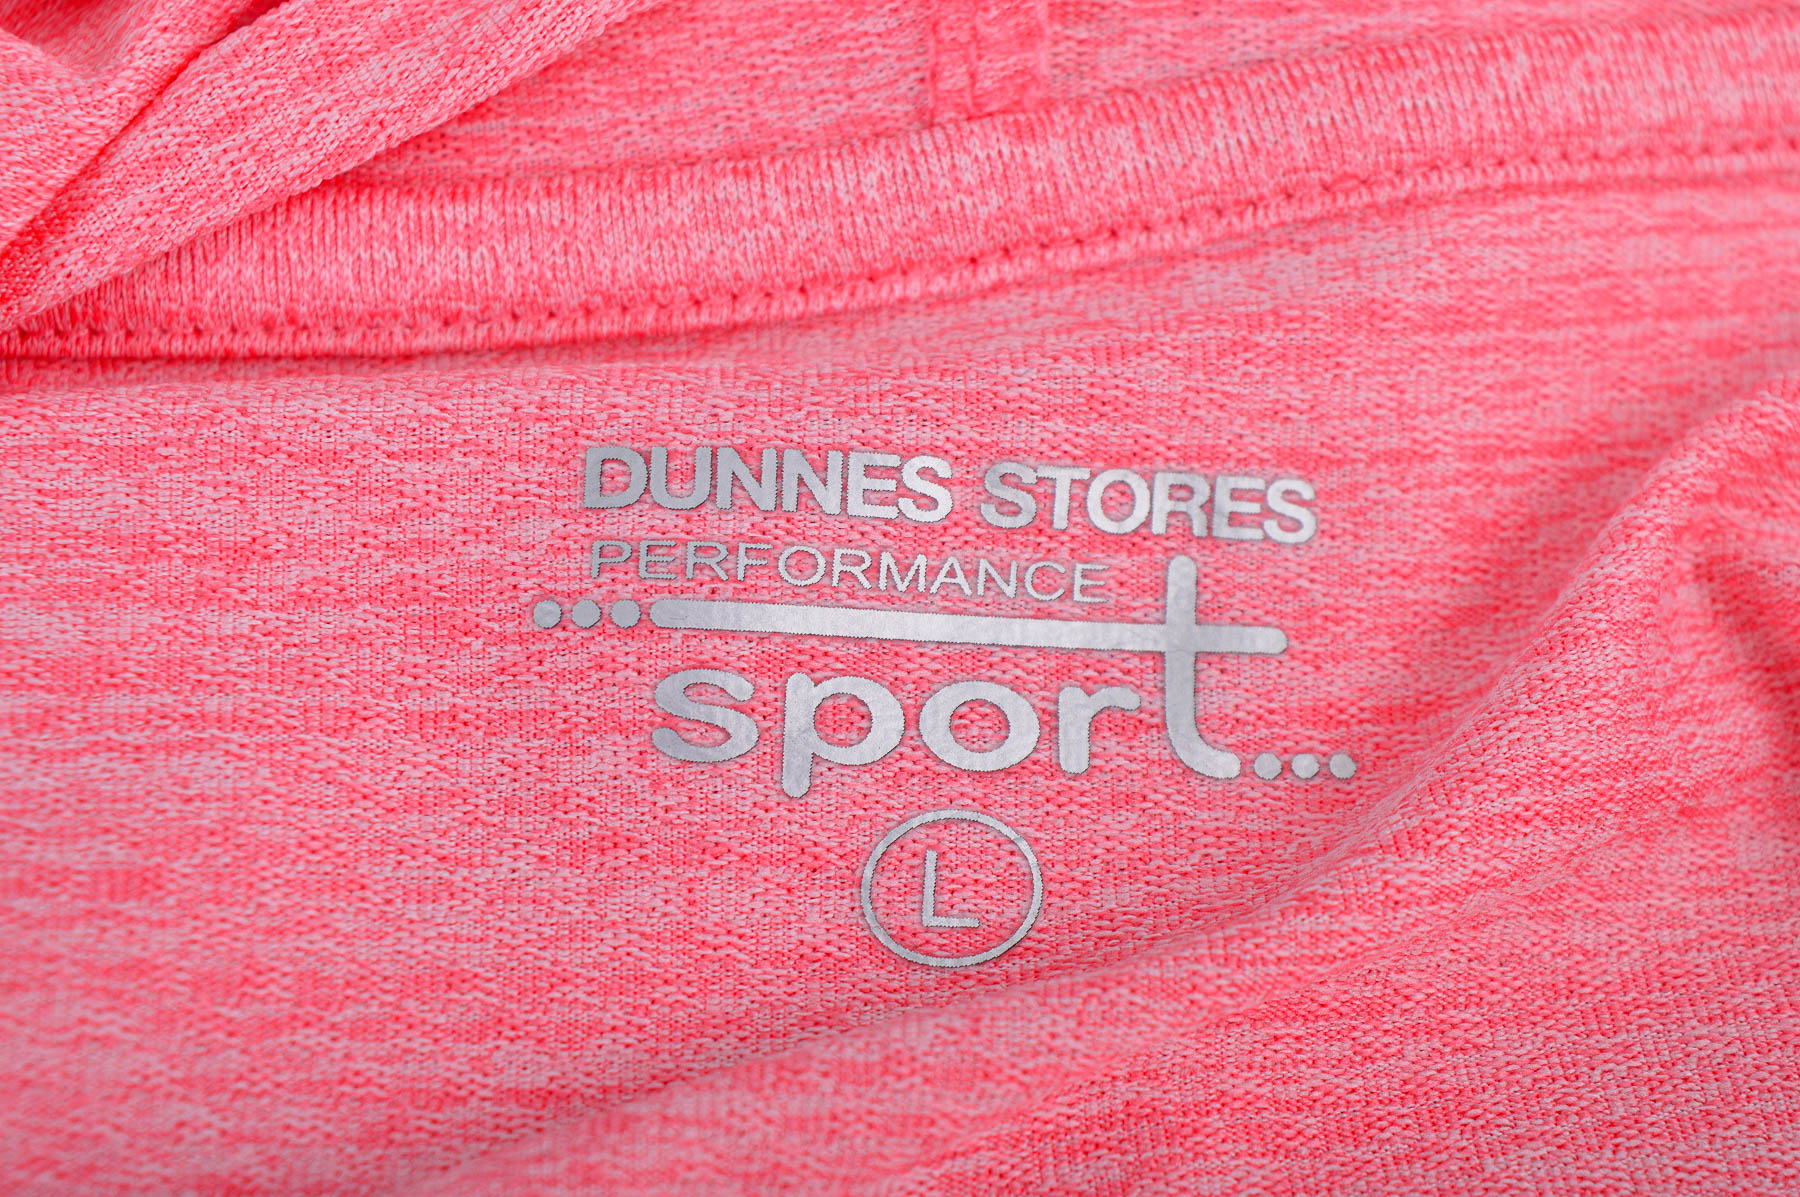 Female sports top - Dunnes Stores - 2